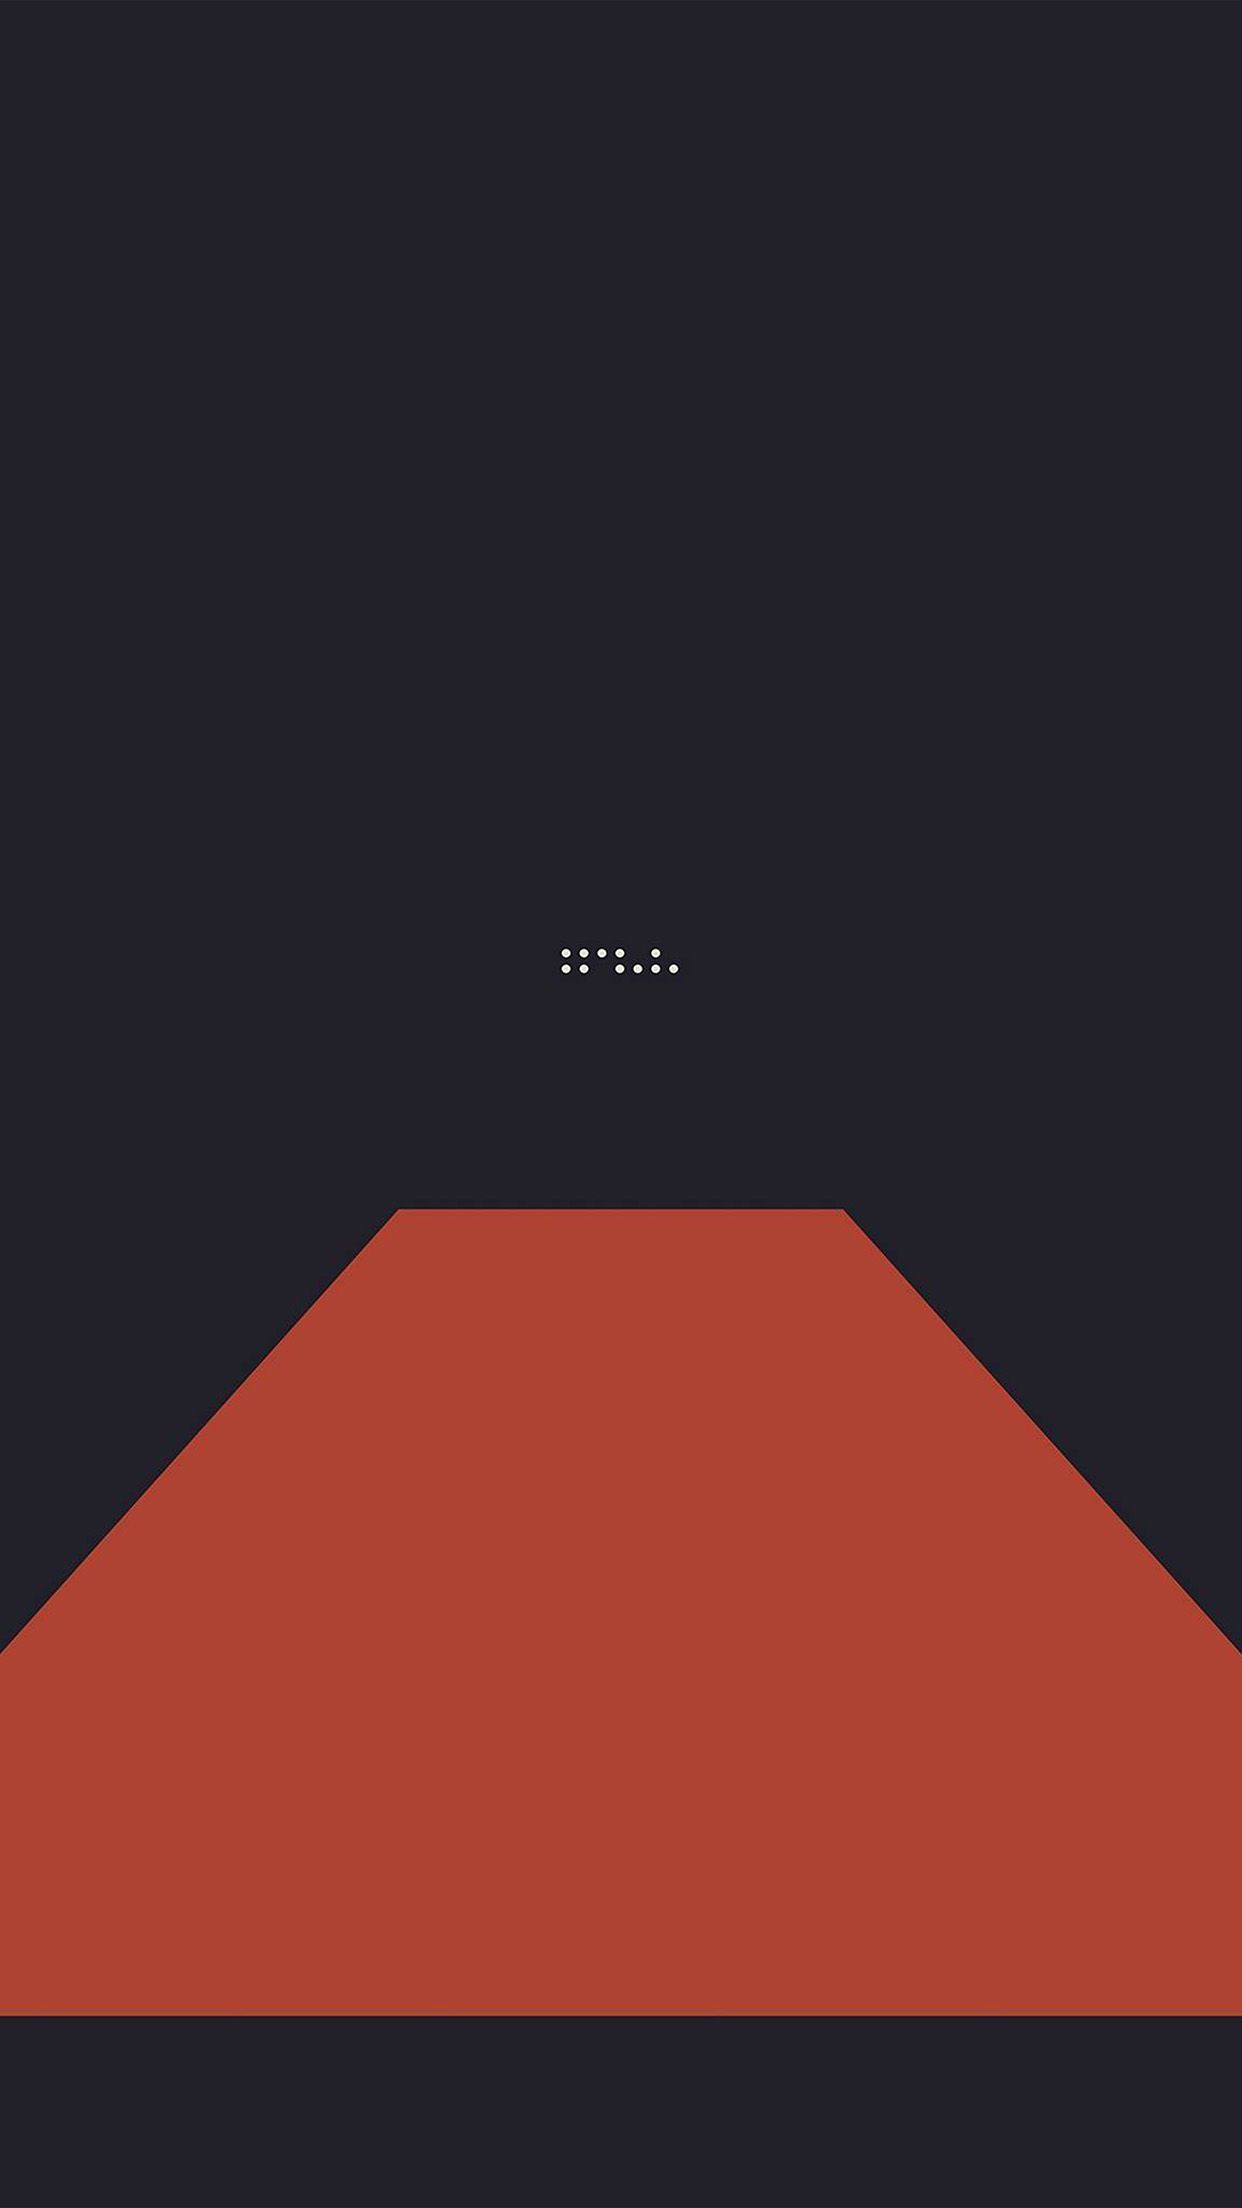 iPhone 6 wallpaper. simple tycho red